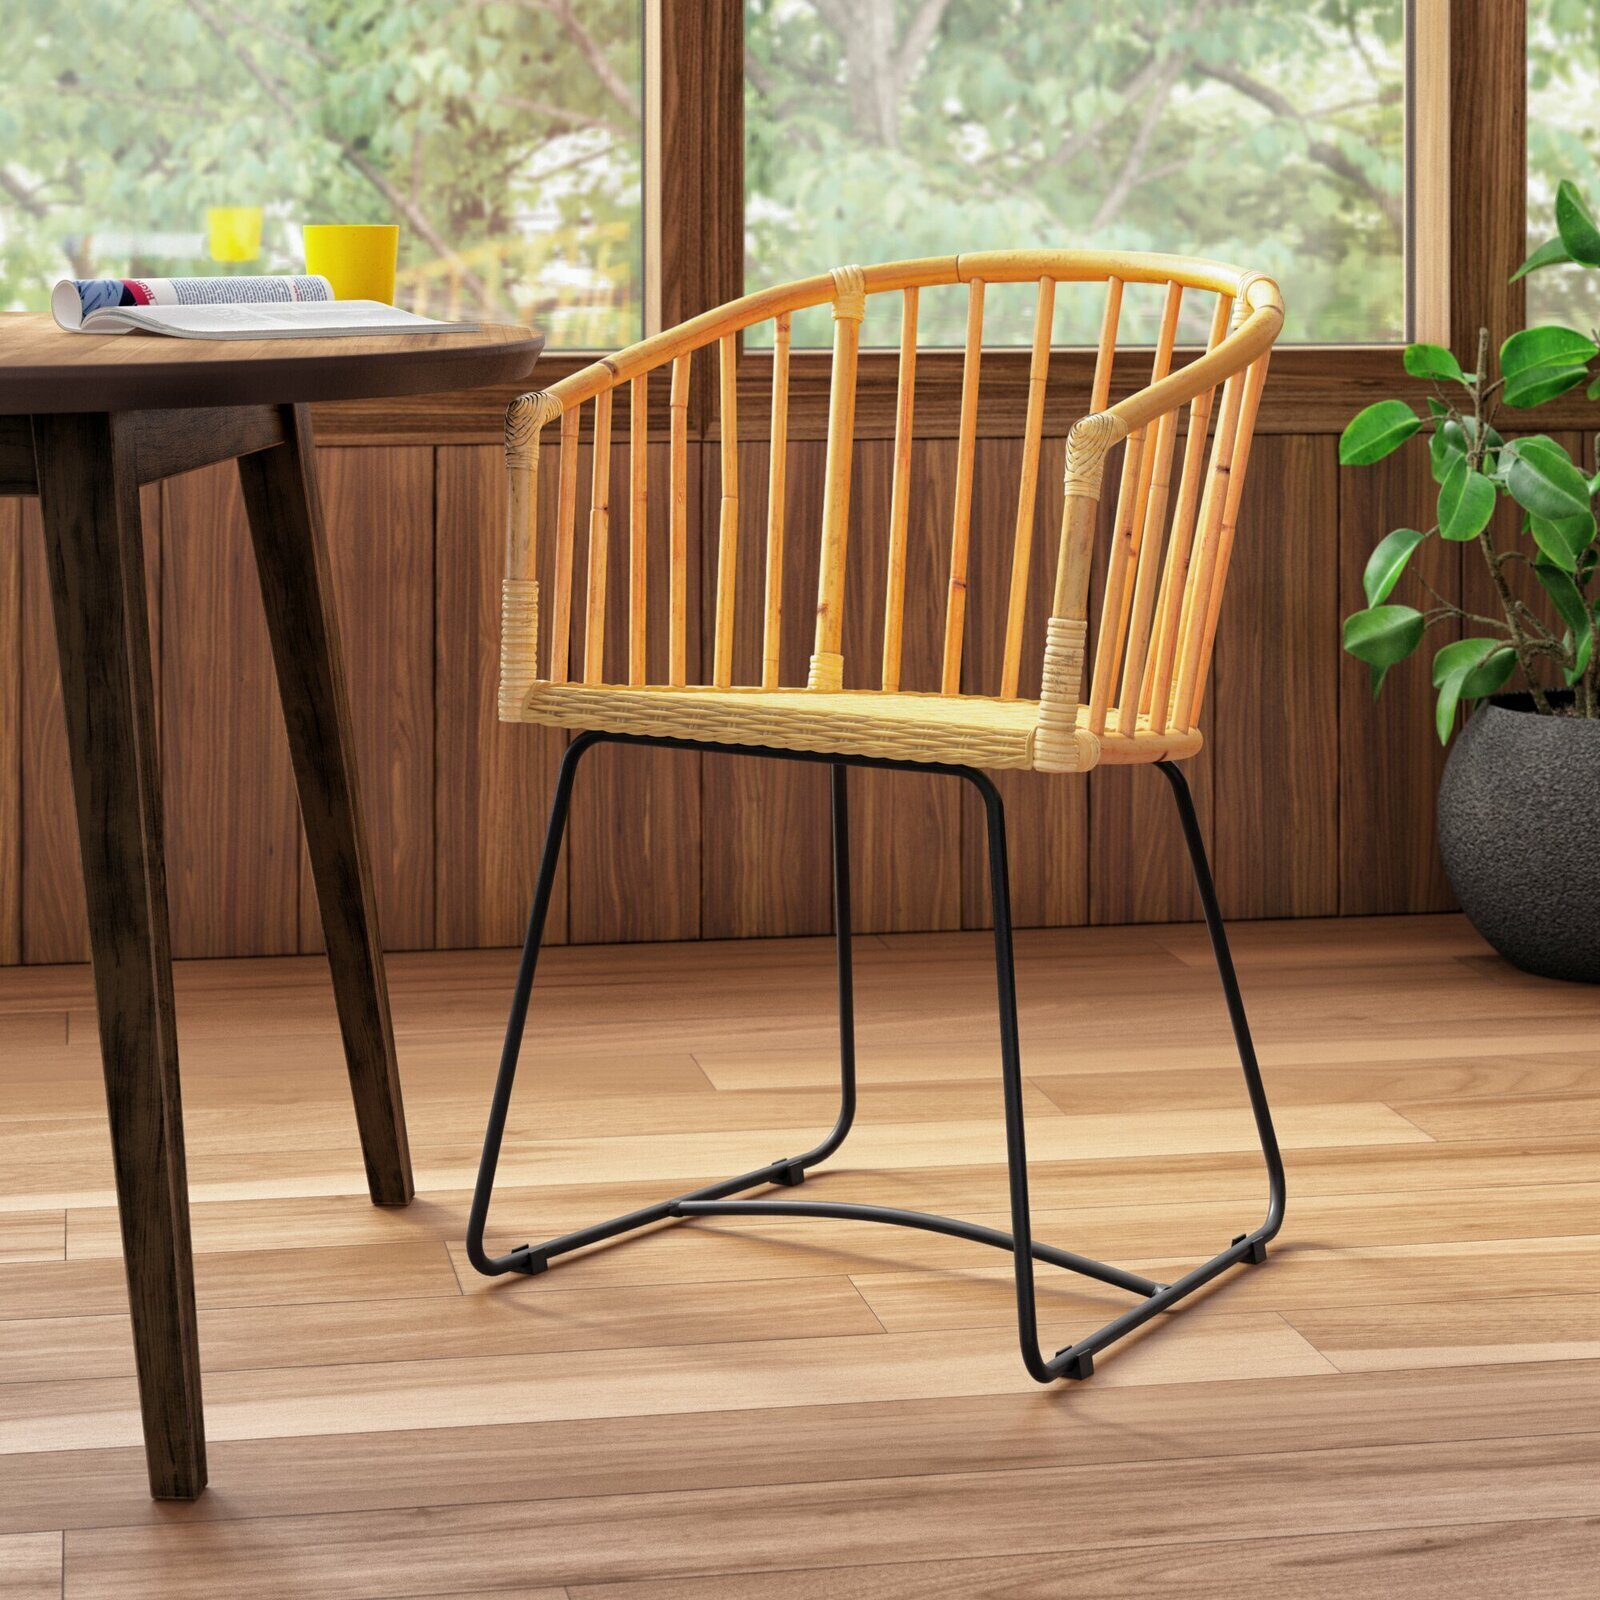 Rattan spindle chair